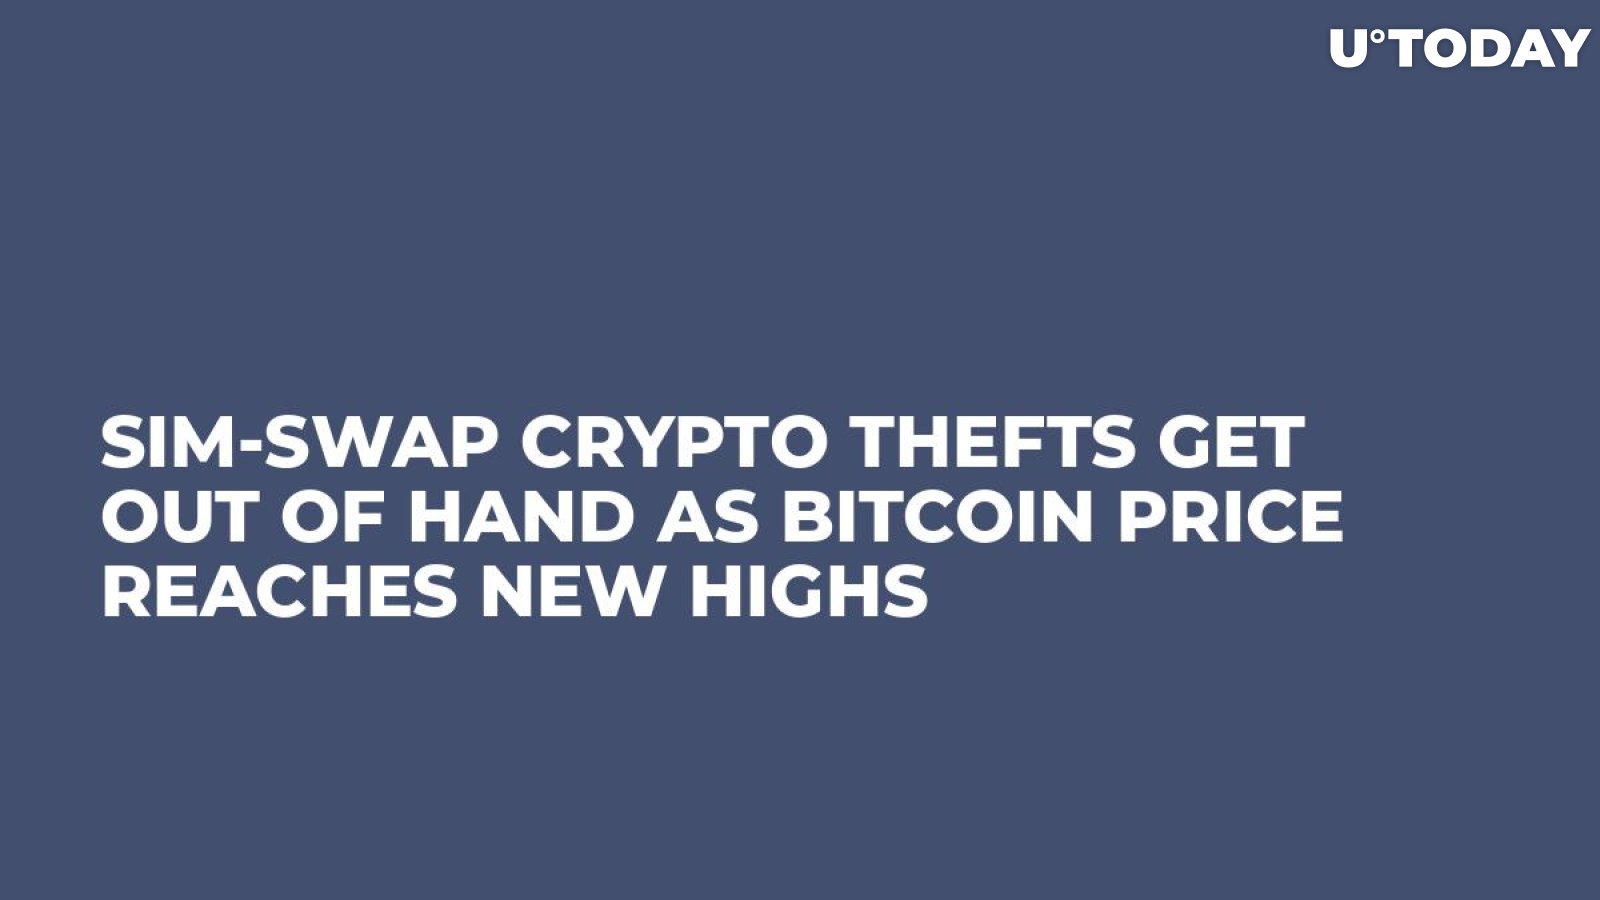 SIM-Swap Crypto Thefts Get Out of Hand as Bitcoin Price Reaches New Highs